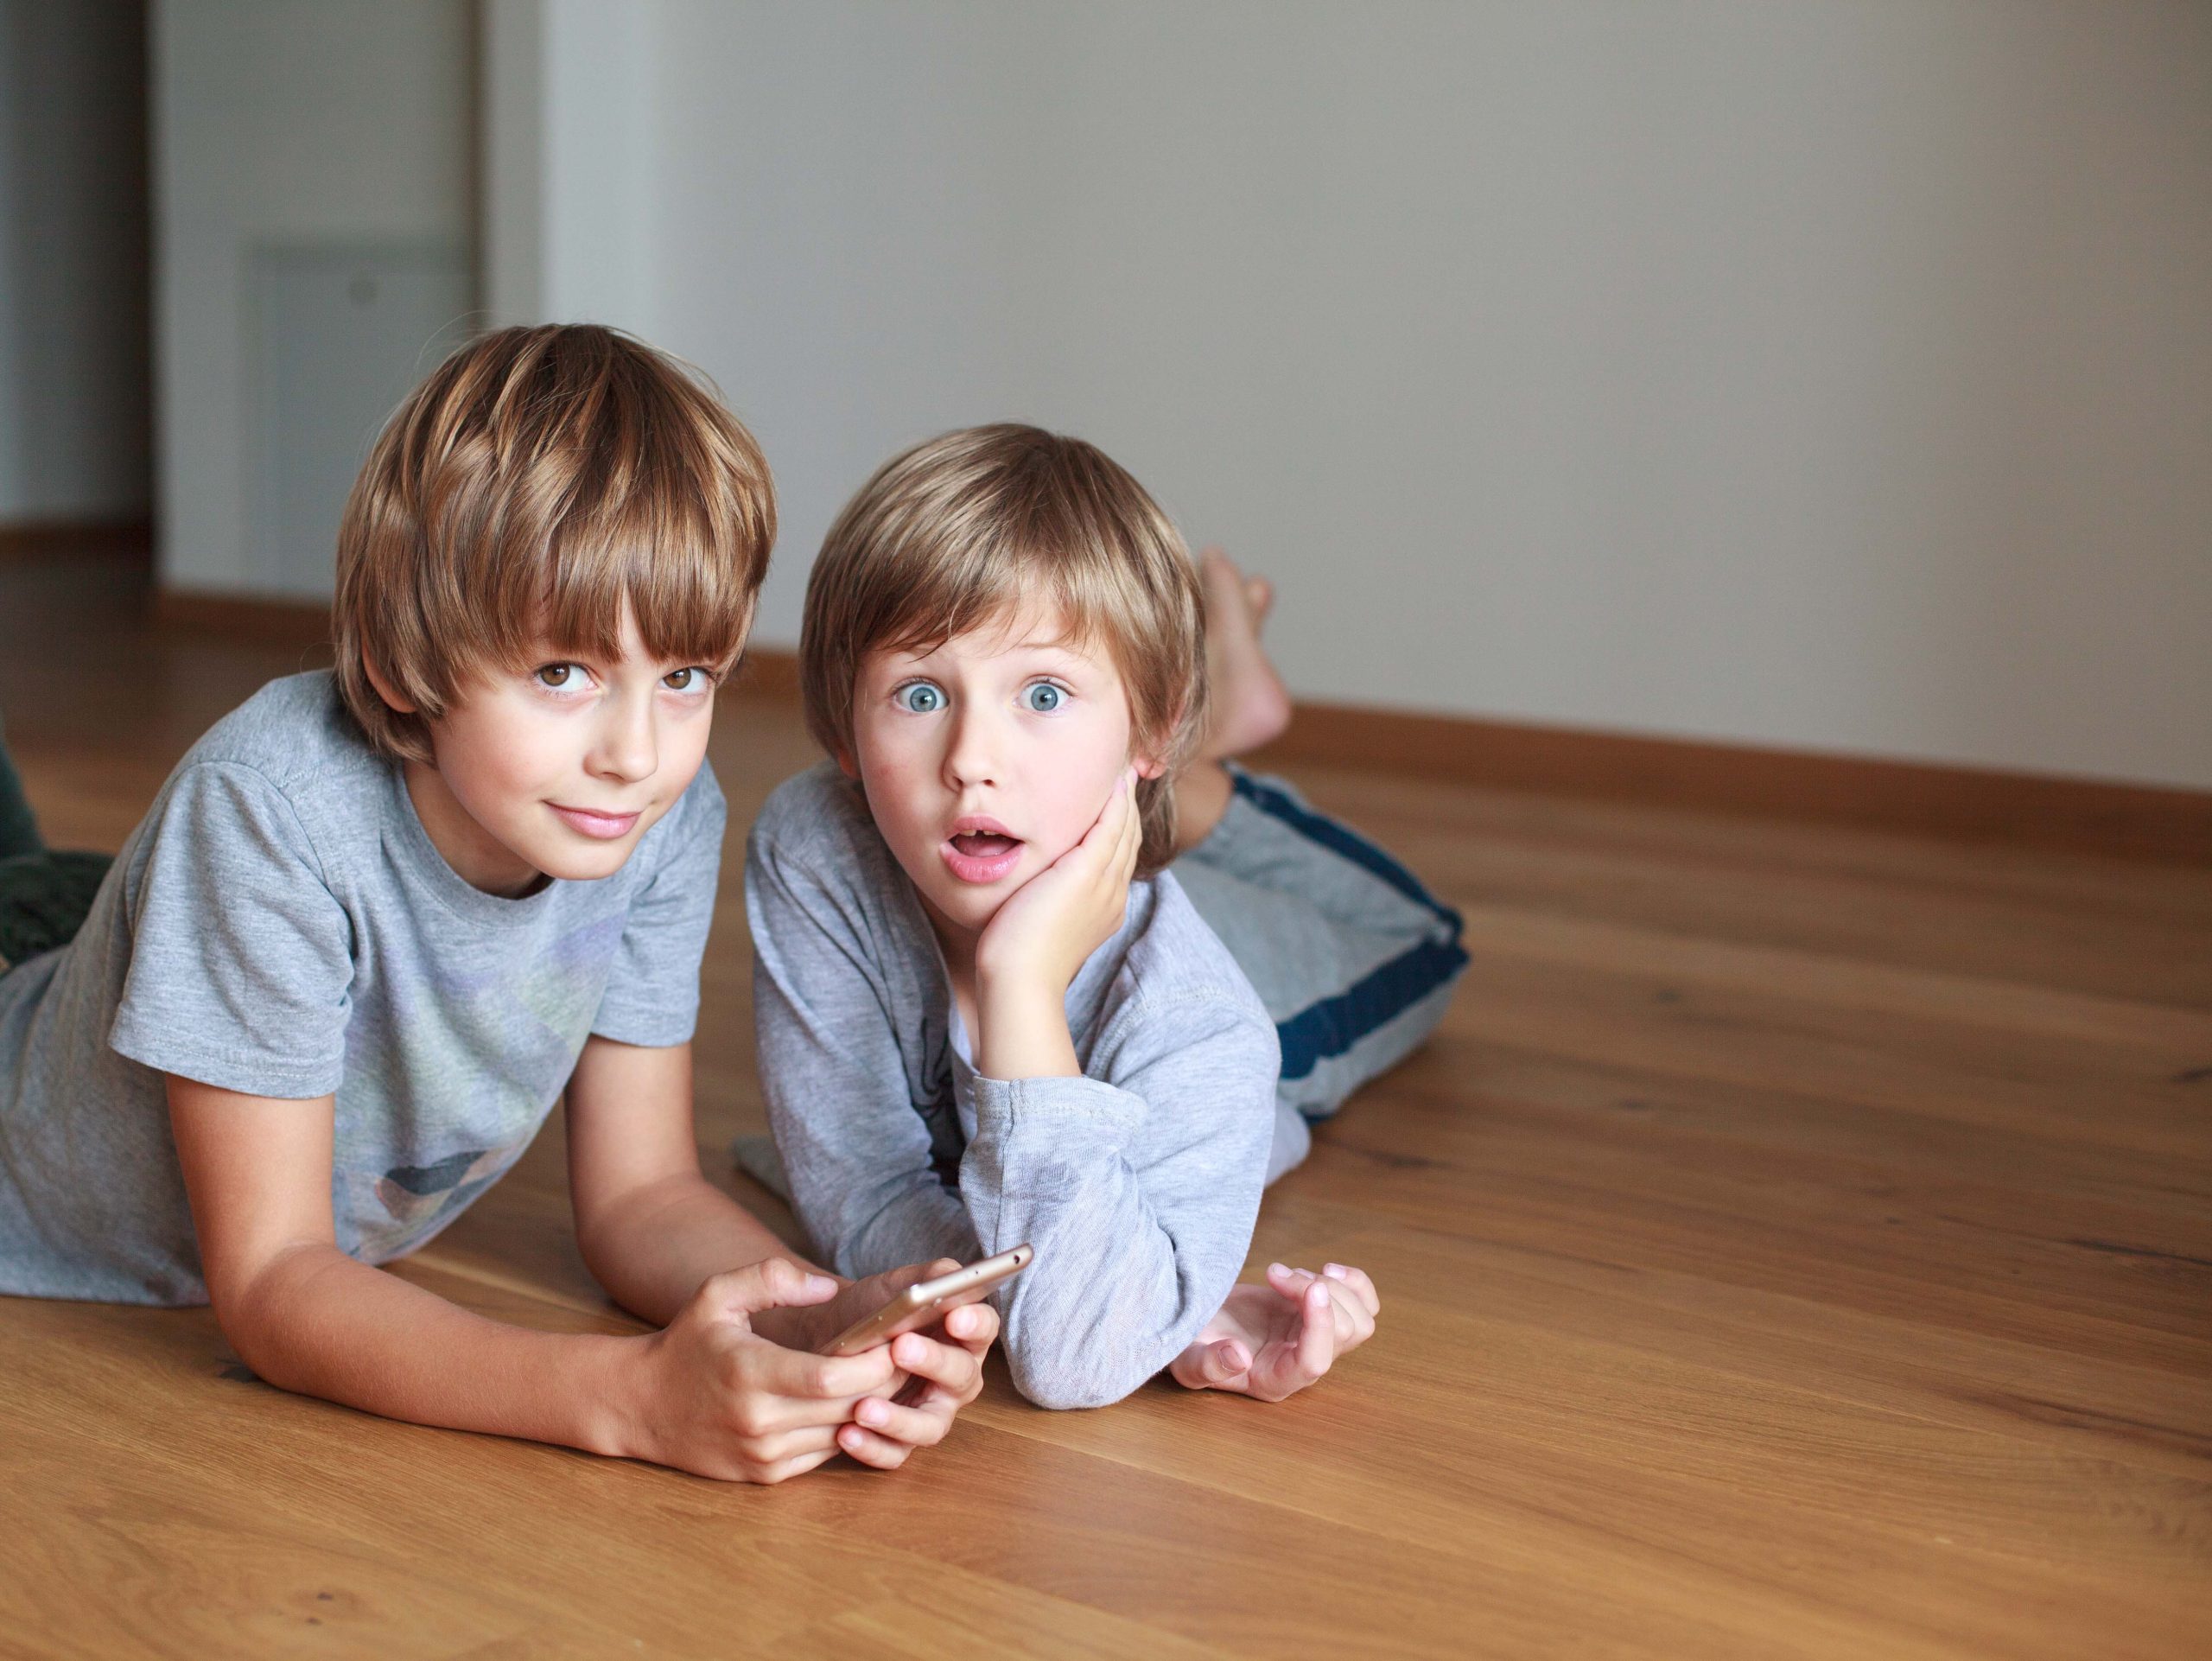 Two surprised kids lying on wooden floor and using mobile phone